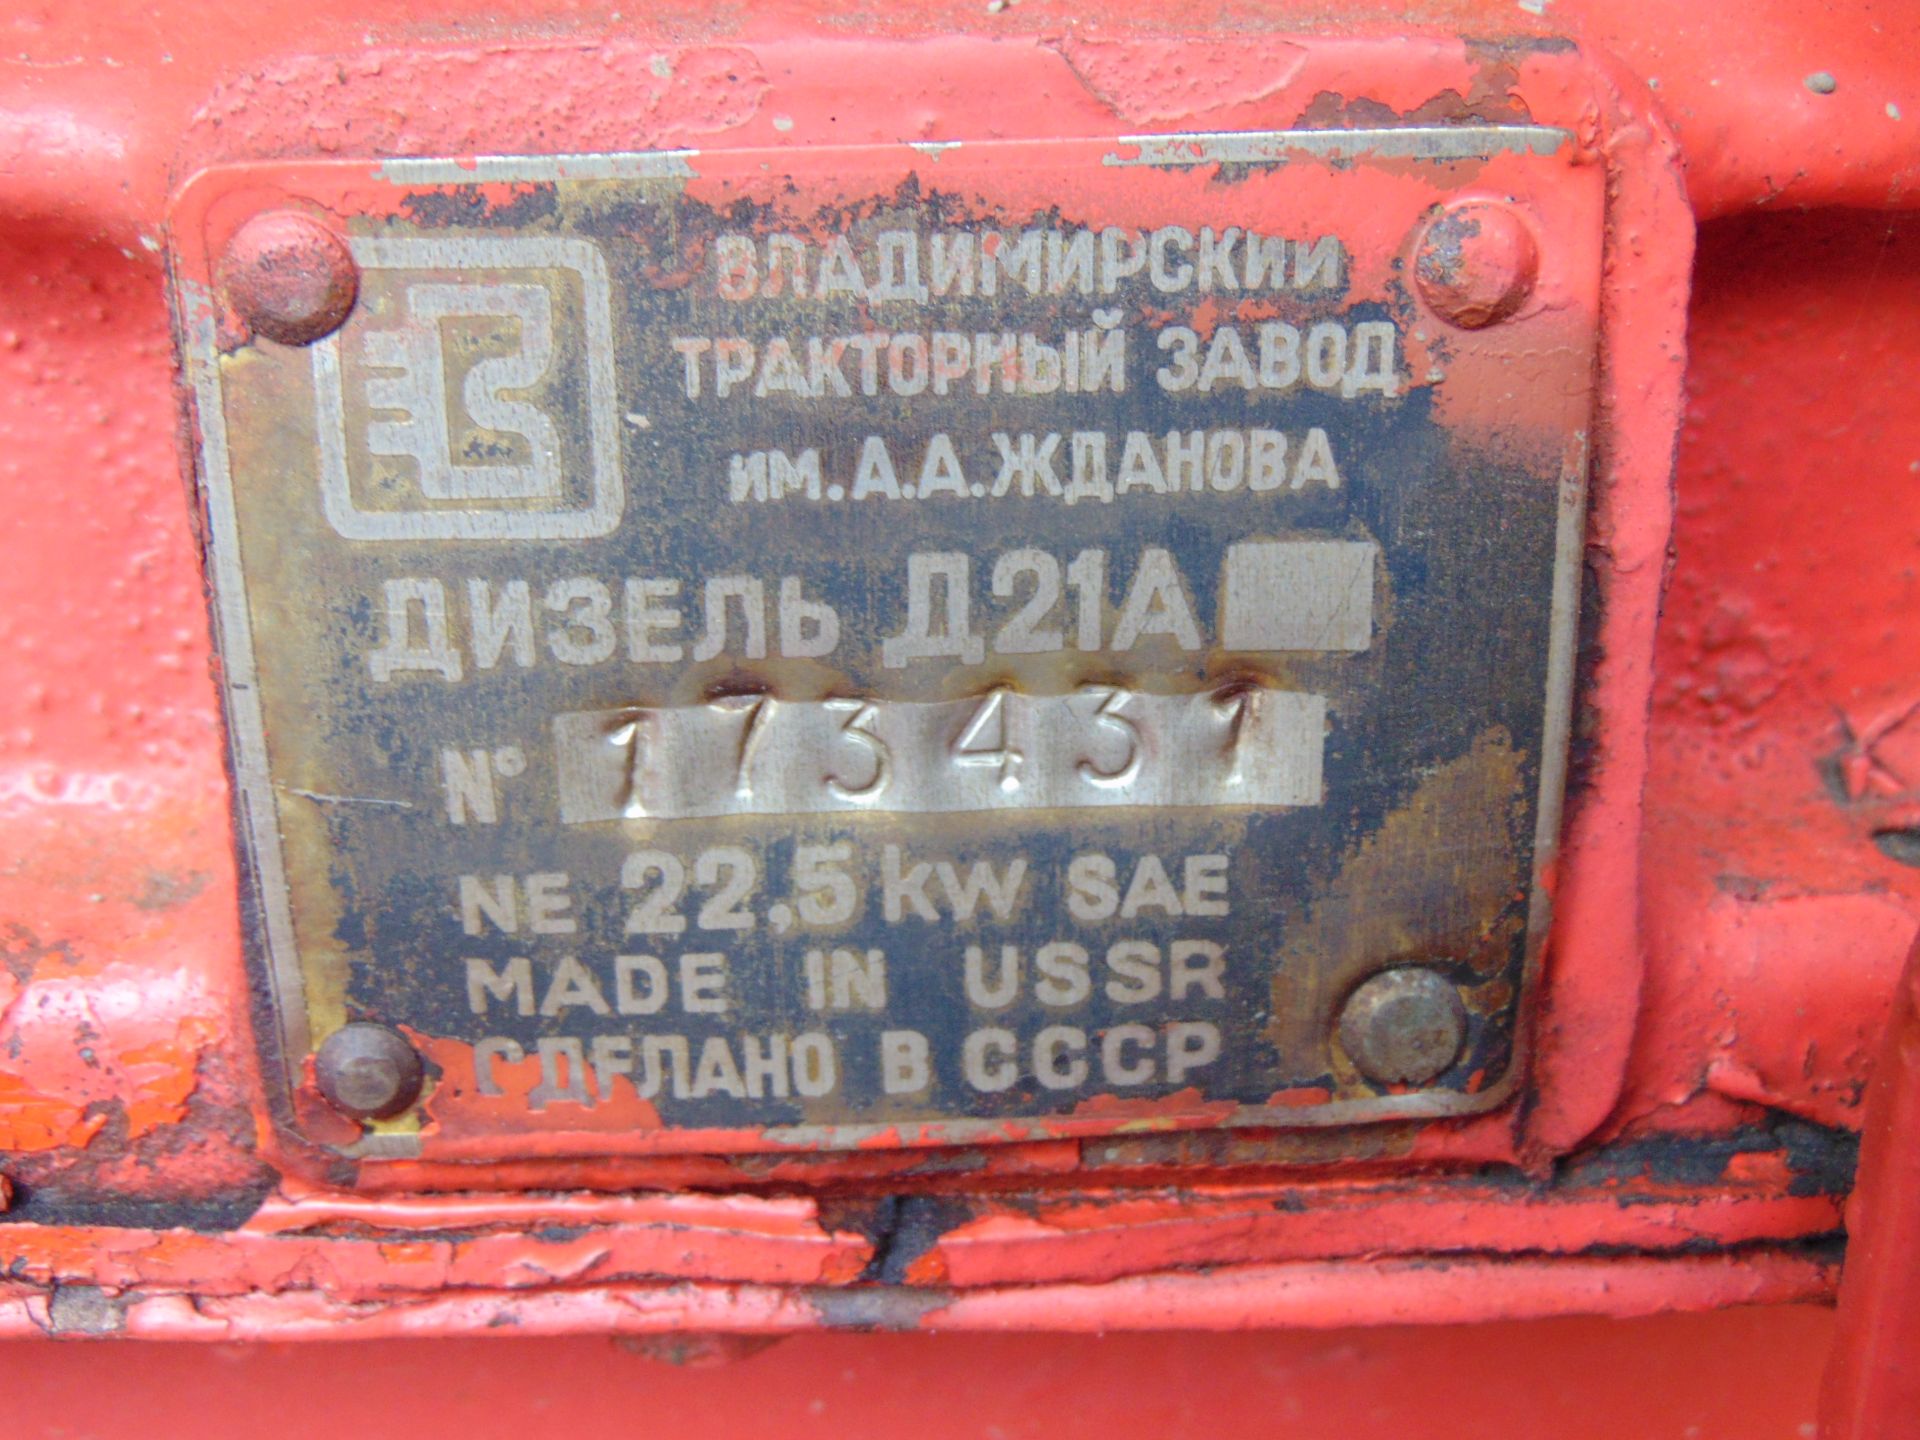 Very Rare USSR Belarus 250 2WD Tractor Very Low Hours! - Image 13 of 26